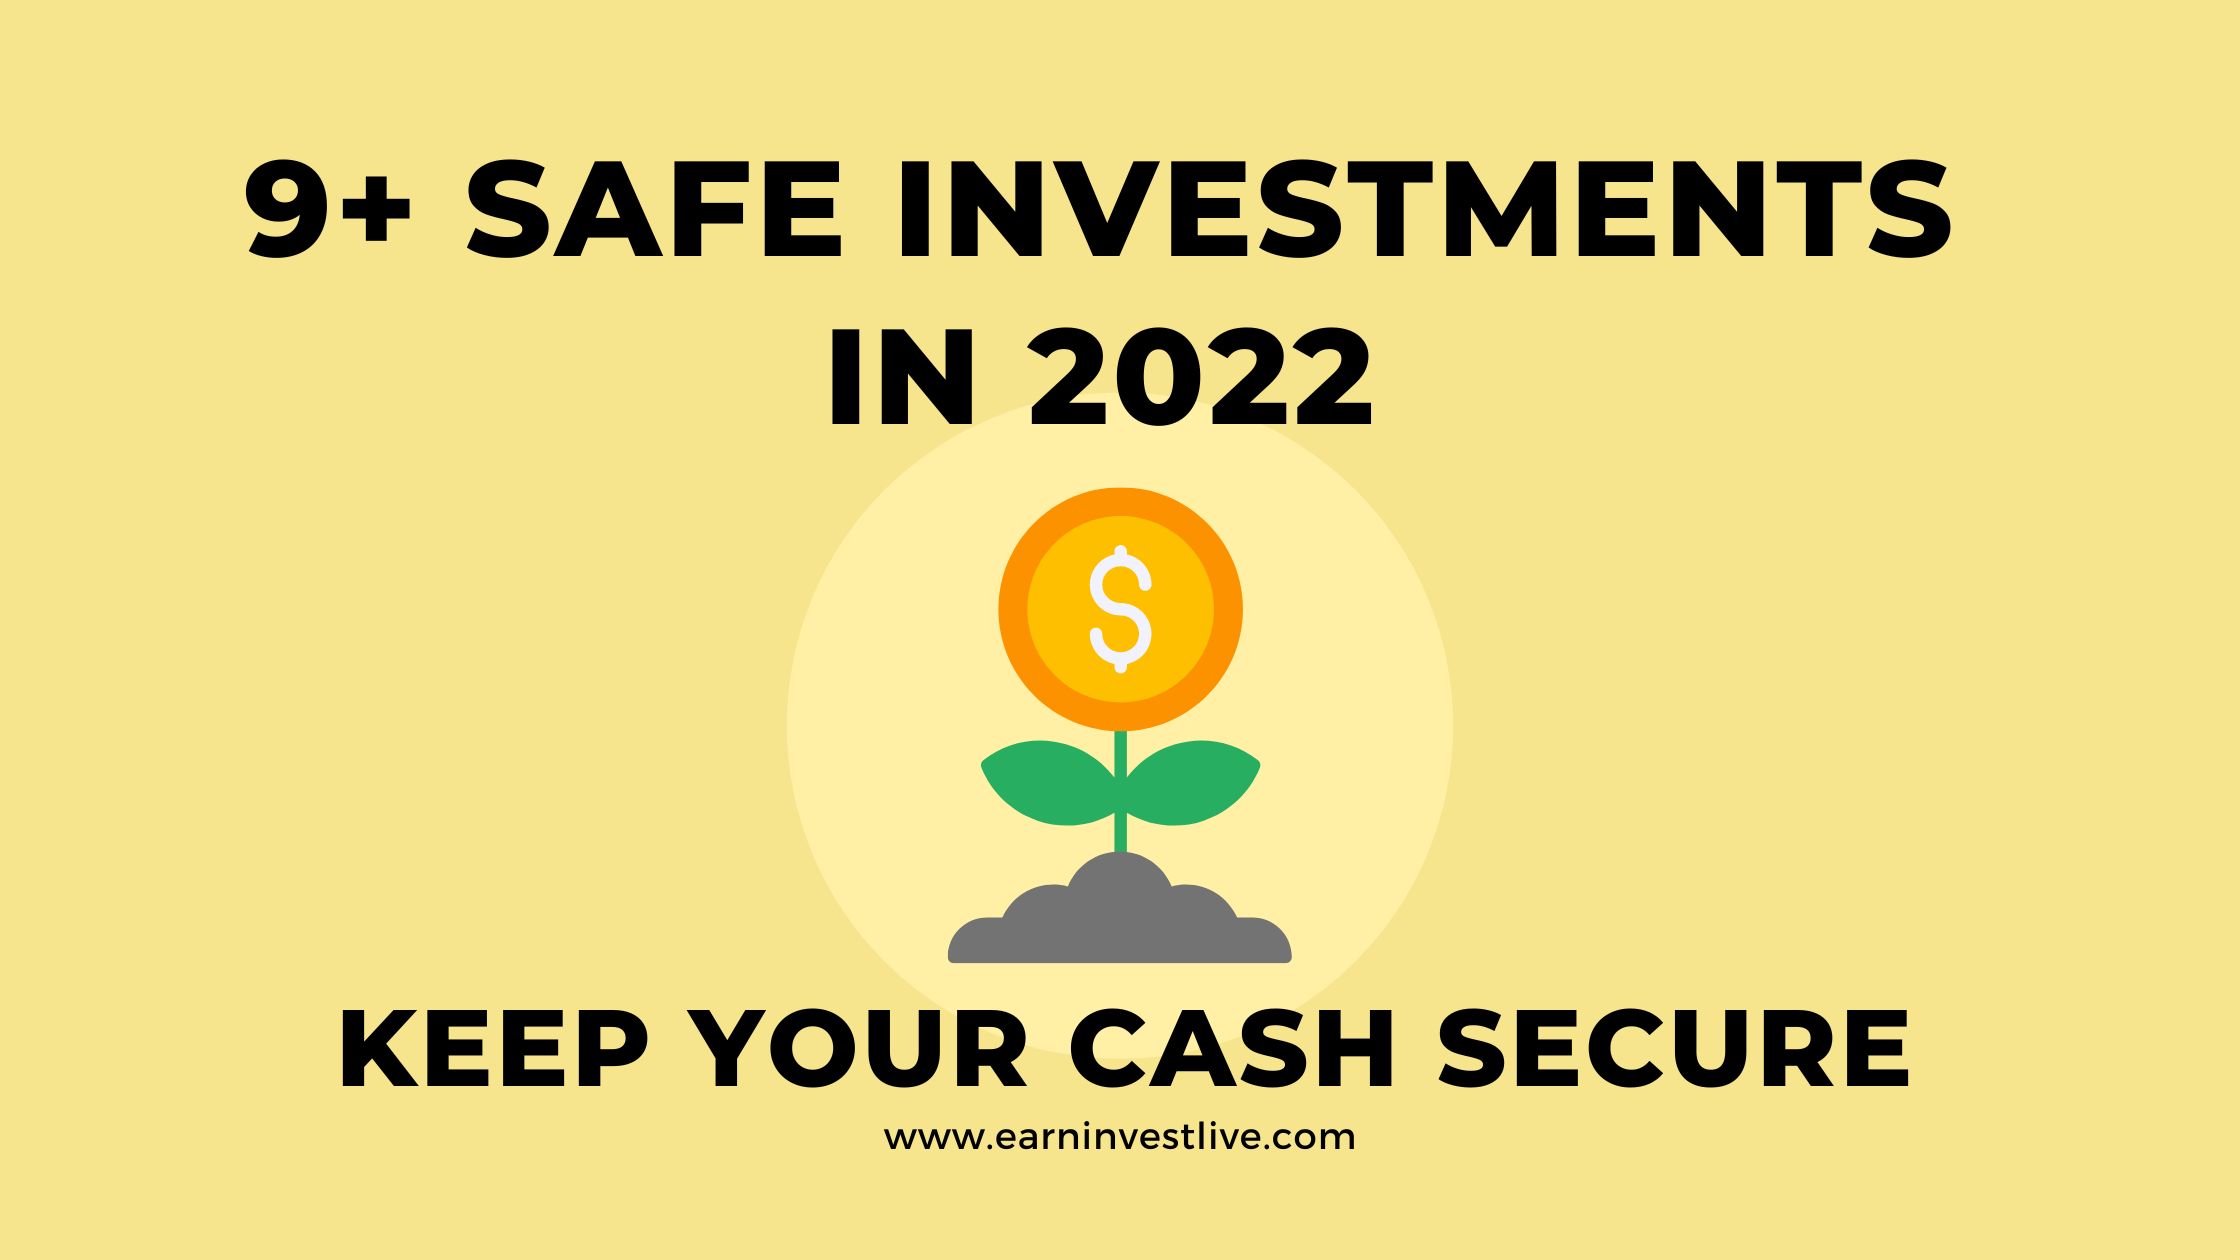 9+ Safe Investments In 2022 That Will Help Keep Your Cash Secure